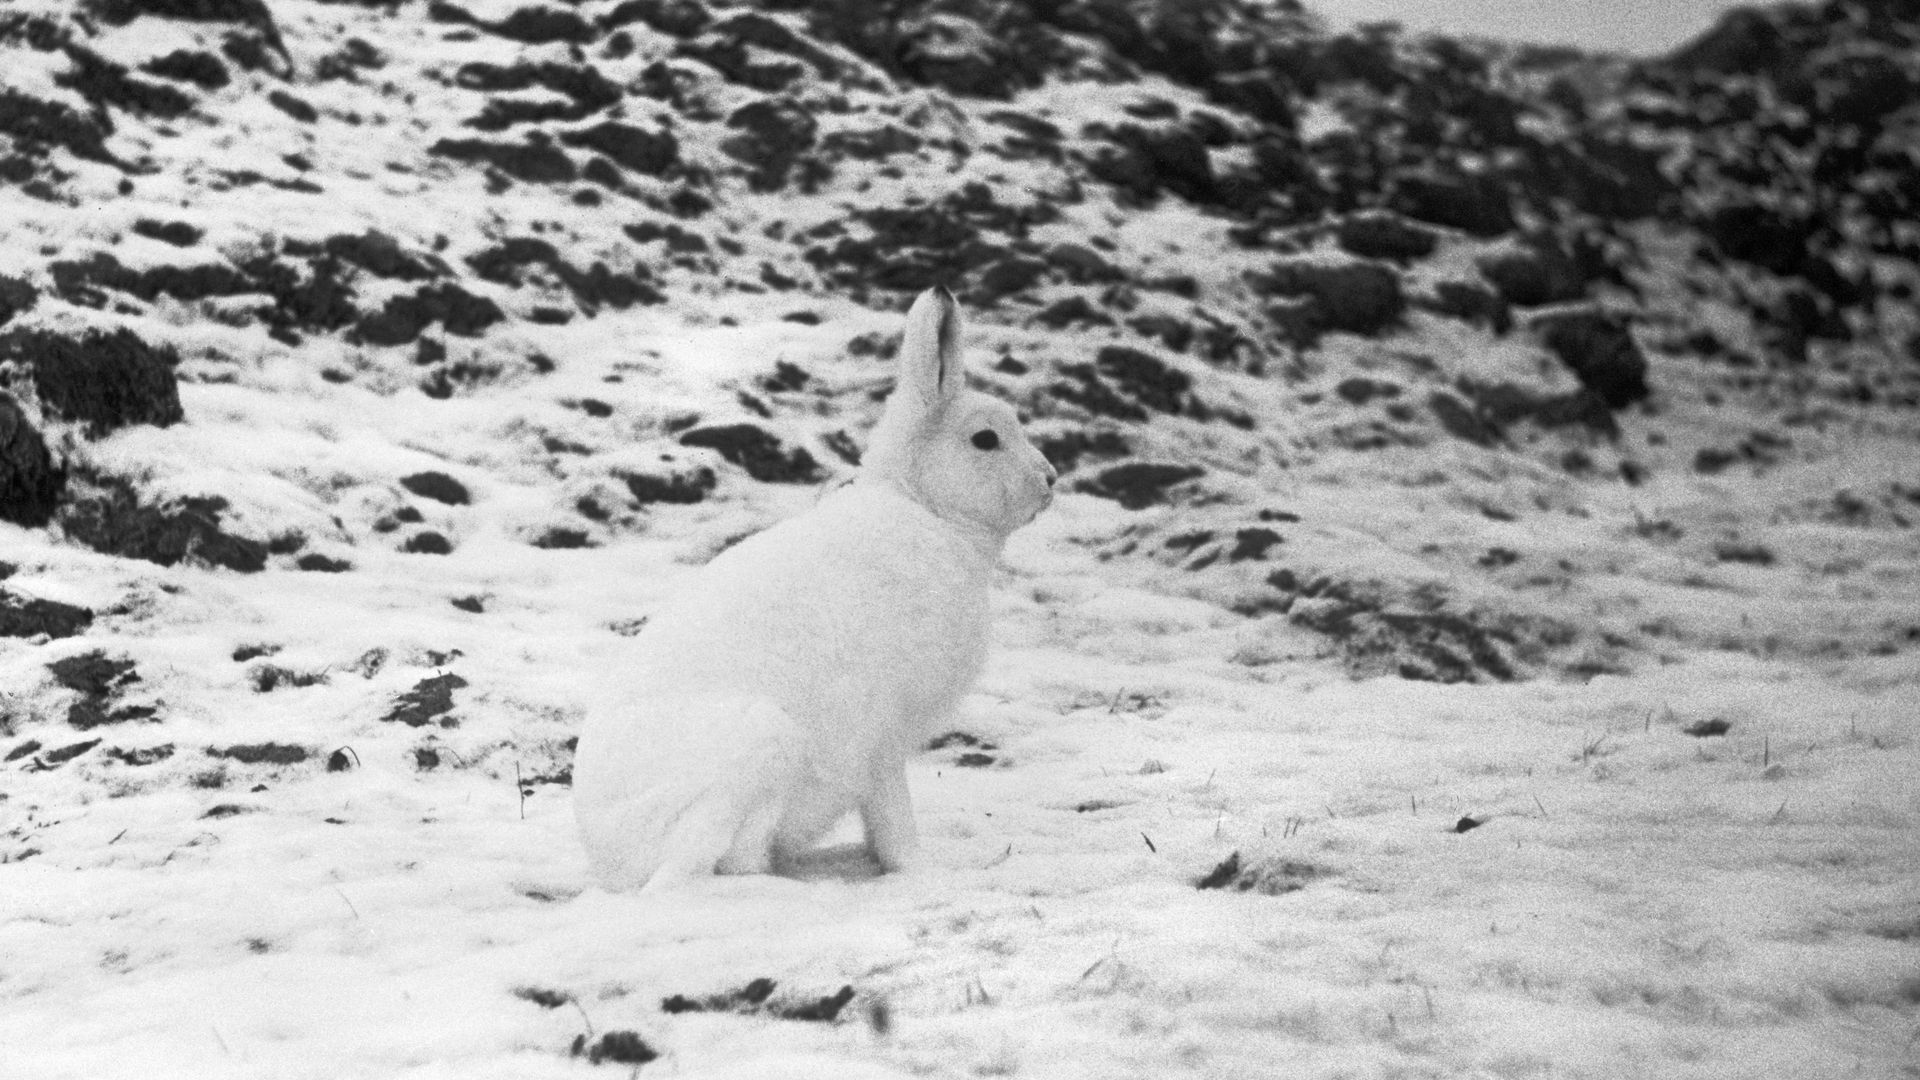 View of an arctic hare in the snow on one of the Queen Elizabeth Islands in the Canadian Arctic Archipelago, Canada, 1958. 